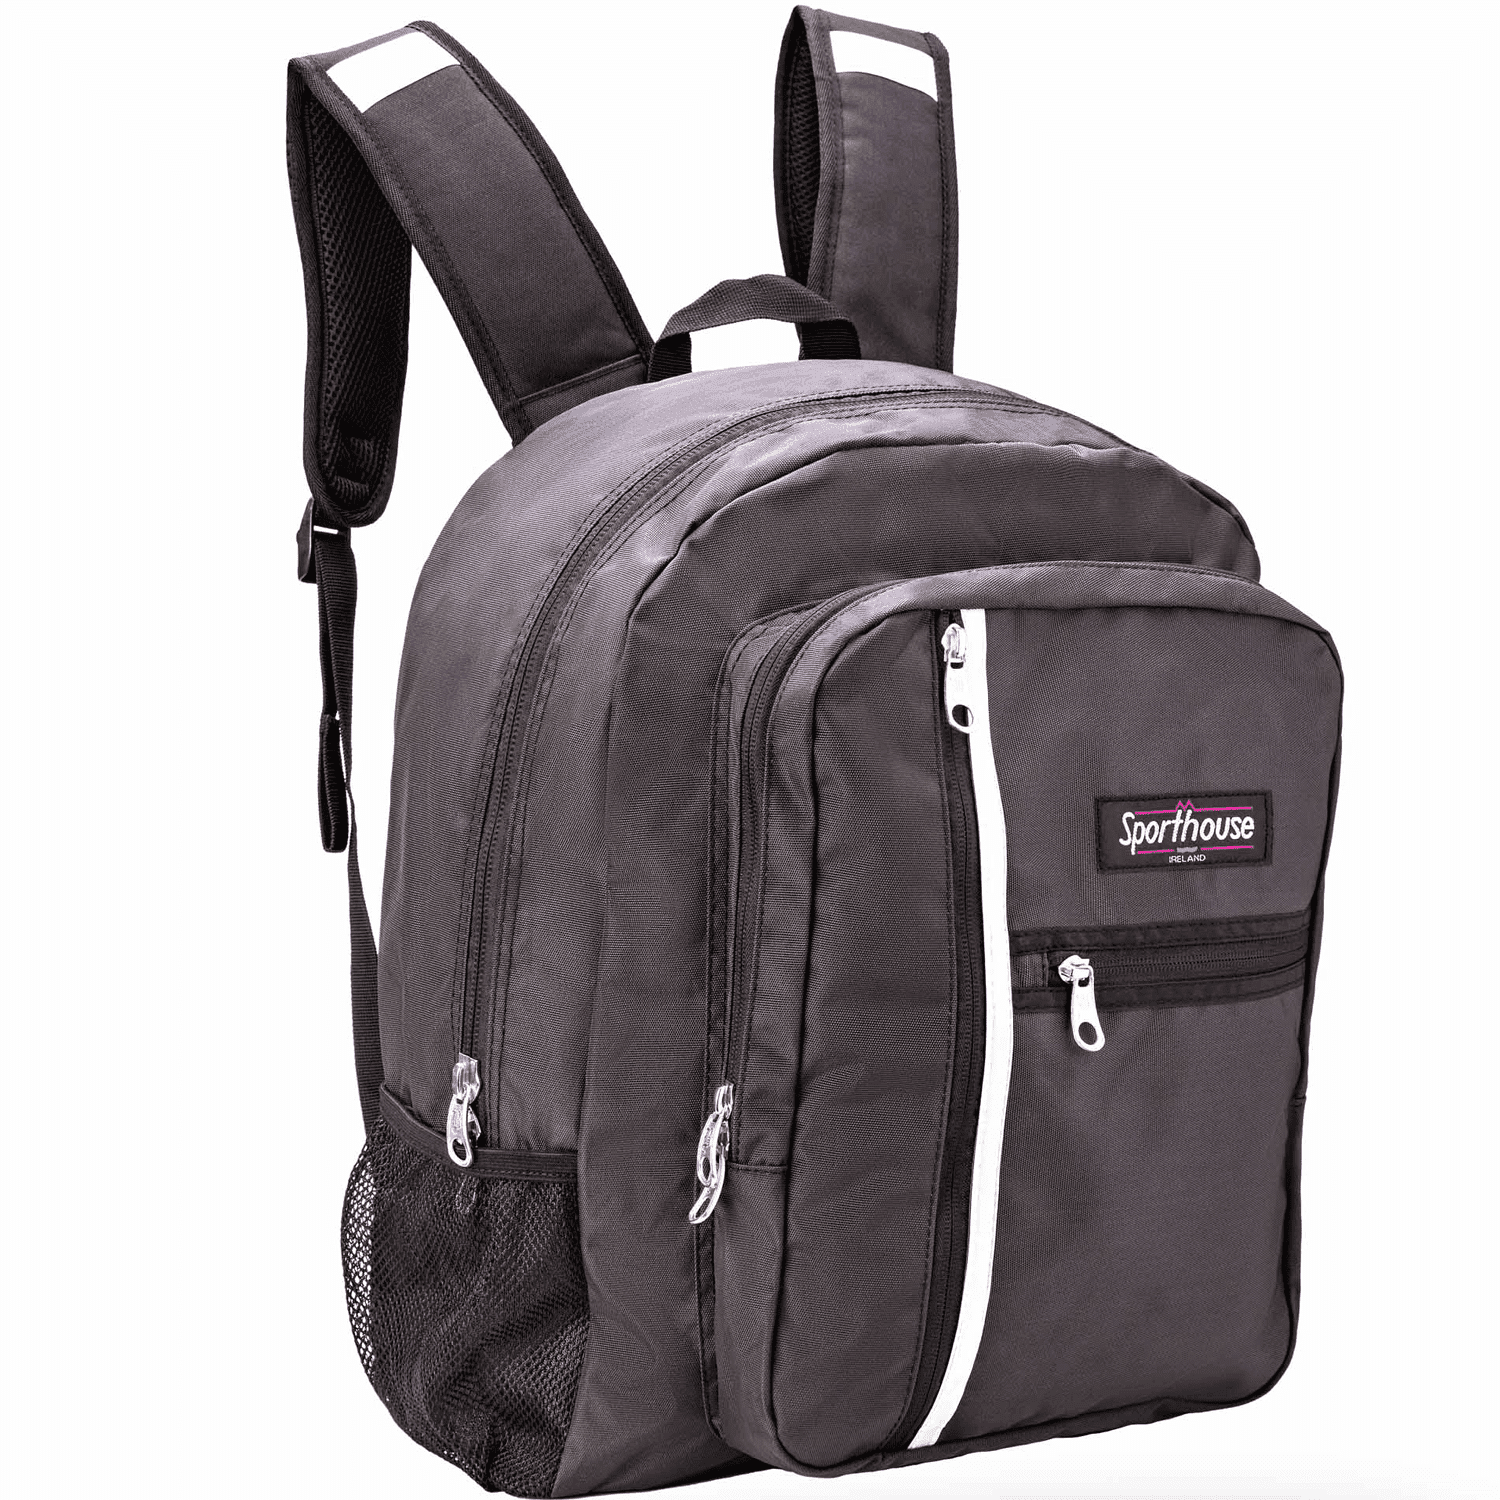 Sporthouse Student 2000 42L Backpack - Black/Grey 3 Shaws Department Stores